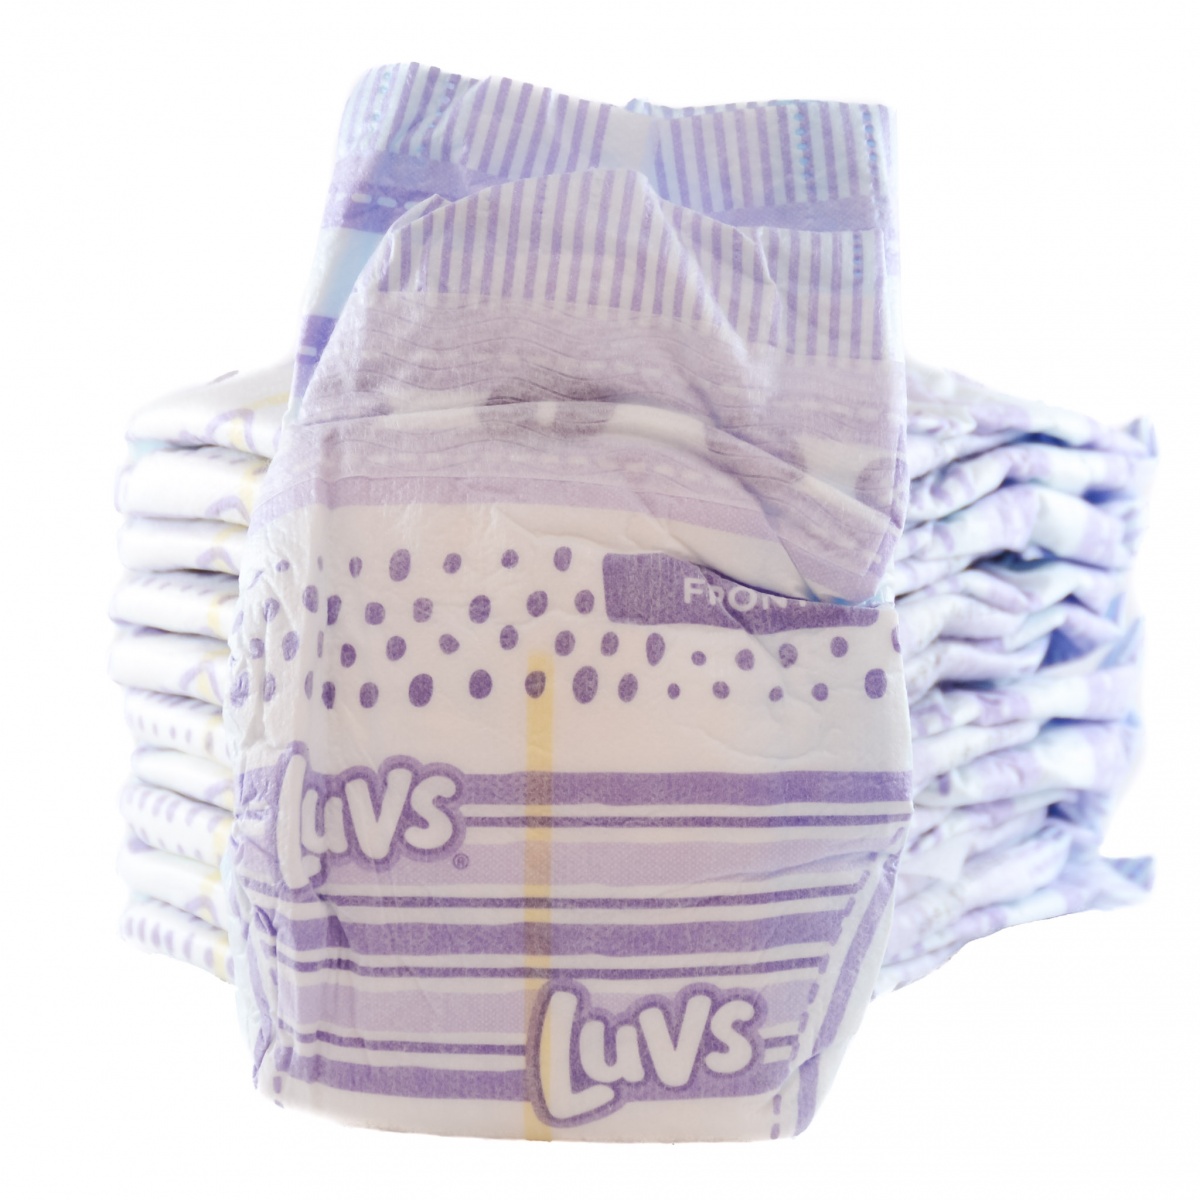 Luvs Ultra Leakguards Diapers, Size 4 Review 